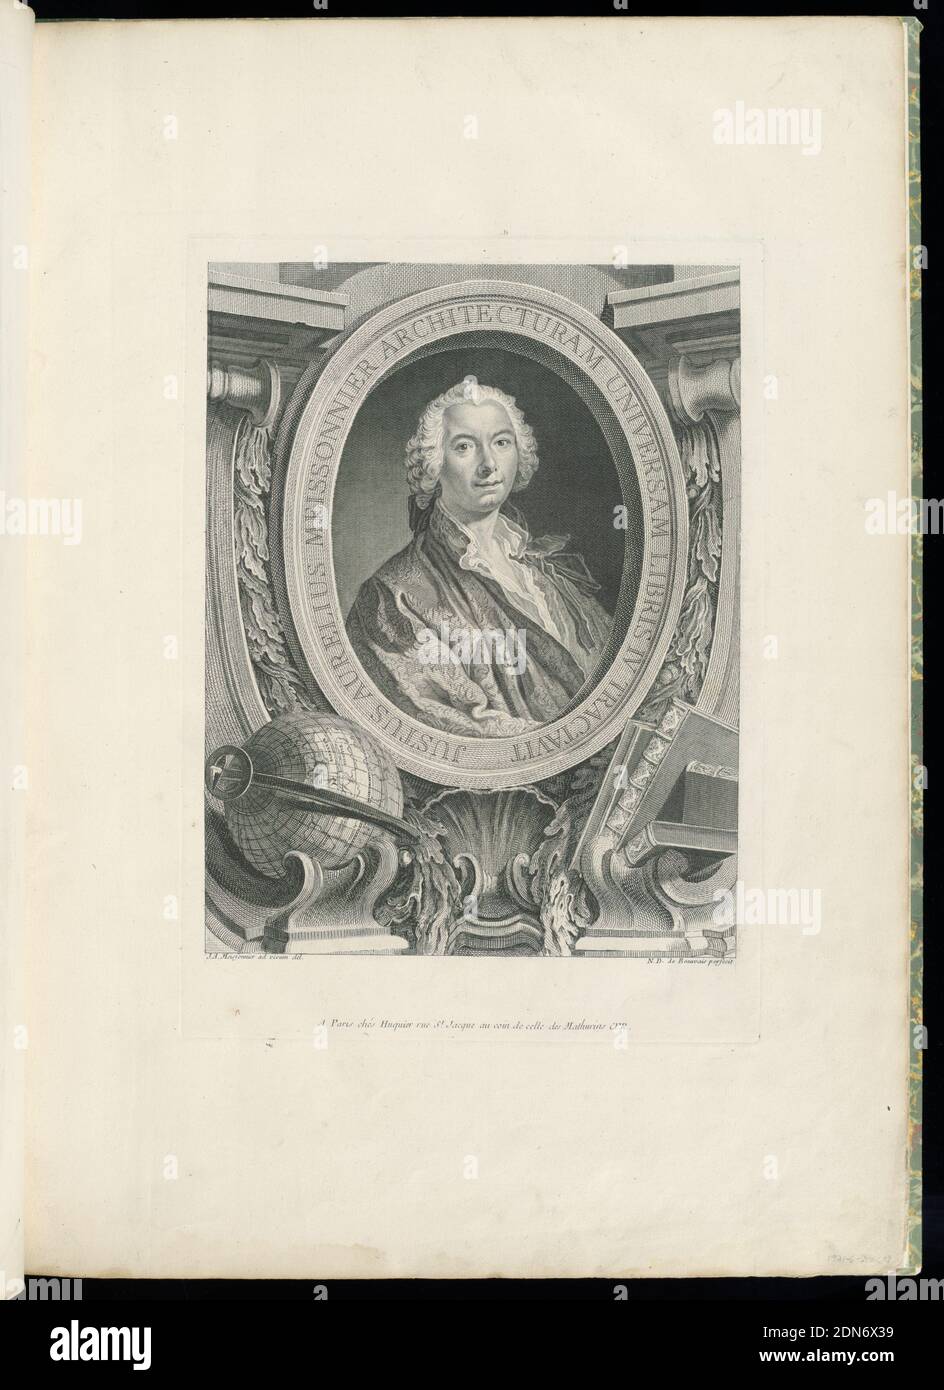 Portrait of J. A. Meissonnier, Juste-Aurèle Meissonnier, French, b. Italy, 1695–1750, Nicolas Dauphin Beauvais, Gabriel Huquier, French, 1695–1772, Engraving on white laid paper, Third state. Portrait bust of J. A. Meissonnier facing three quarters to his right in oval frame on which is written 'JUSTUS AURELIUS MEISSONNIER ARCHITECTURAM UNIVERSAM LIBRIS IV TRACTAVIT.' The portrait is surrounded by a cartouche consisting of a shell (lower center), a globe (lower left), book (lower right), and acanthus leaves (flanking portrait)., Paris, France, 1748, ornament, Print Stock Photo